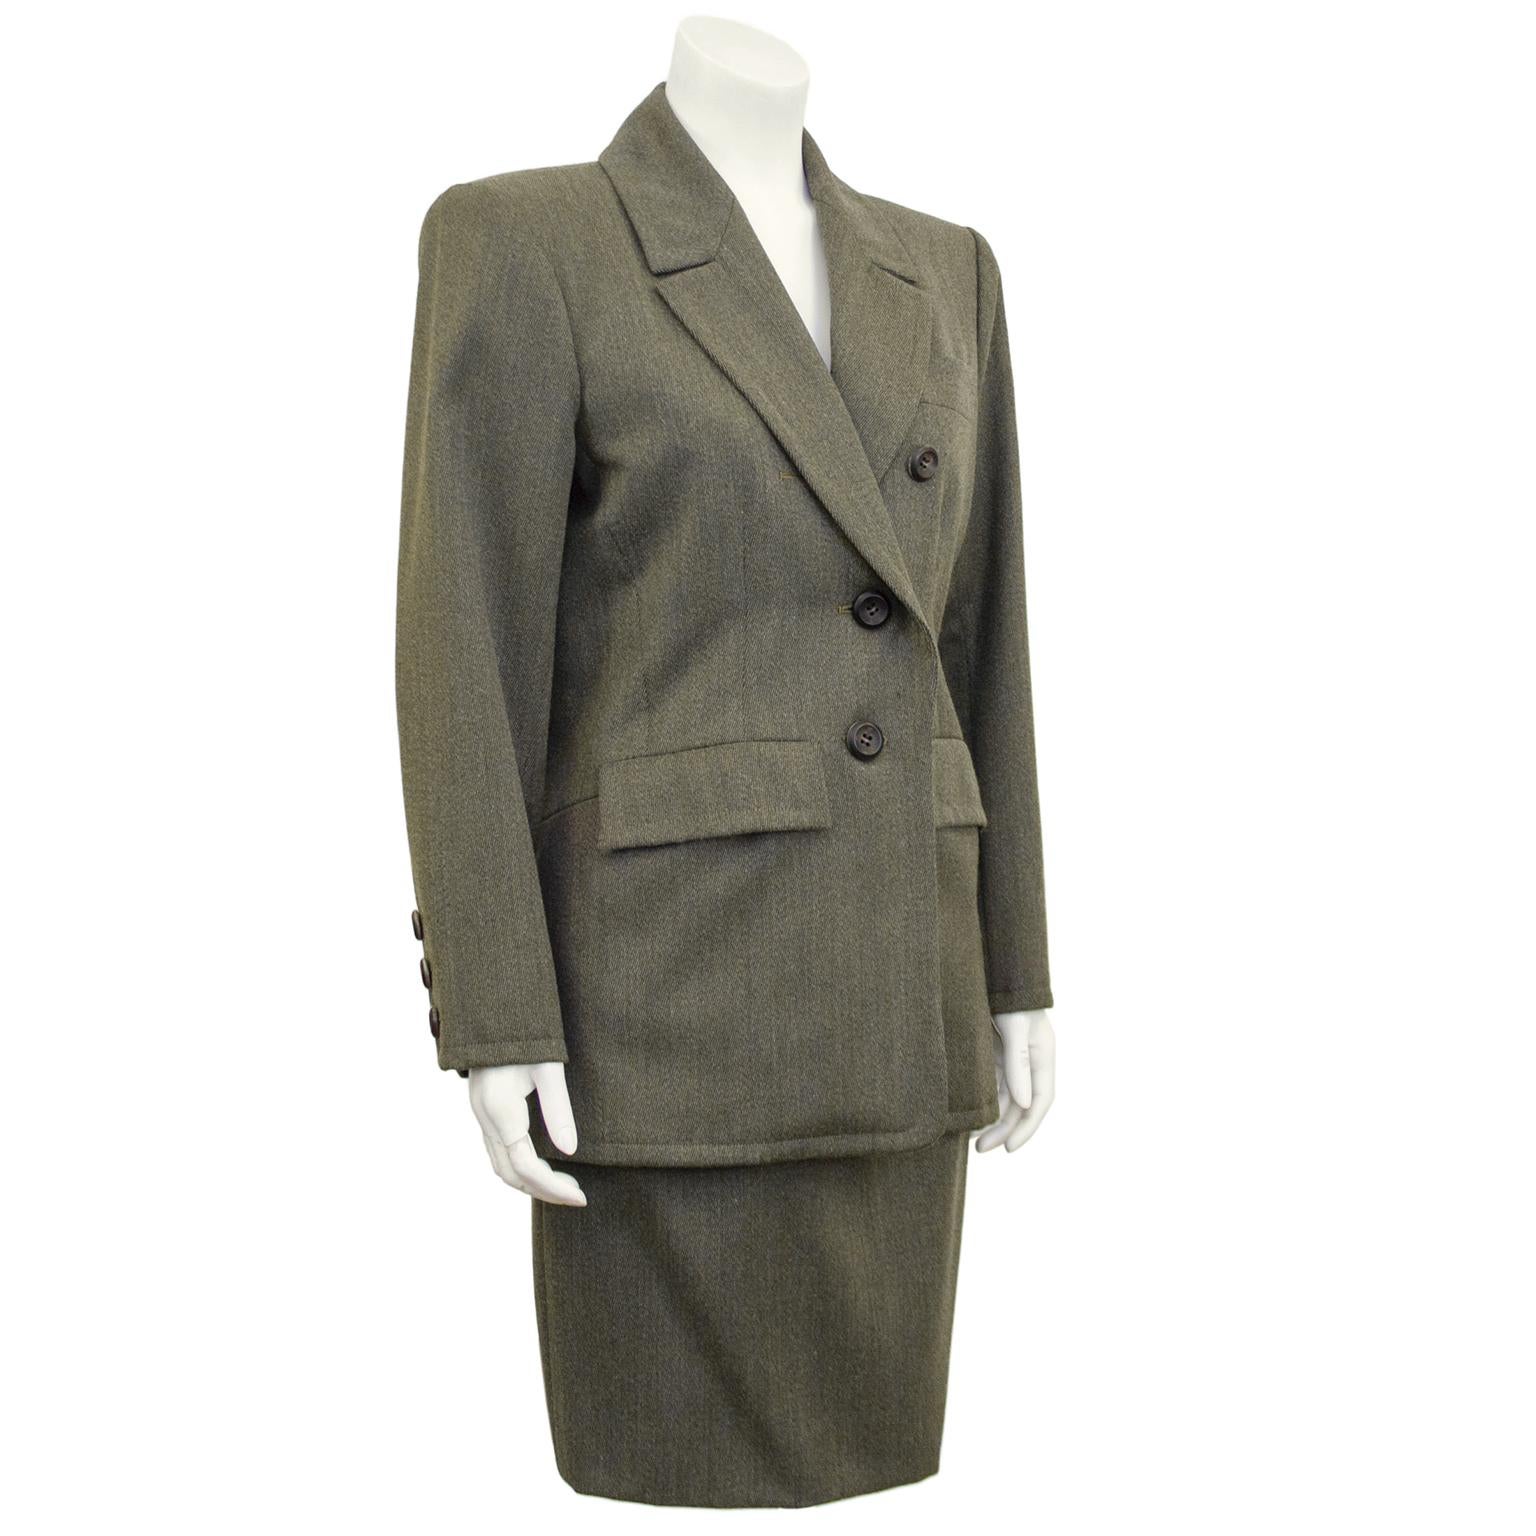 1980s Yves Saint Laurent Rive Gauche khaki wool skirt suit. Jacket features shoulder pads that create a strong, statement shape. Jacket is slightly asymmetric with two middle and lower functioning buttons. Two flap pockets and slit breast pocket